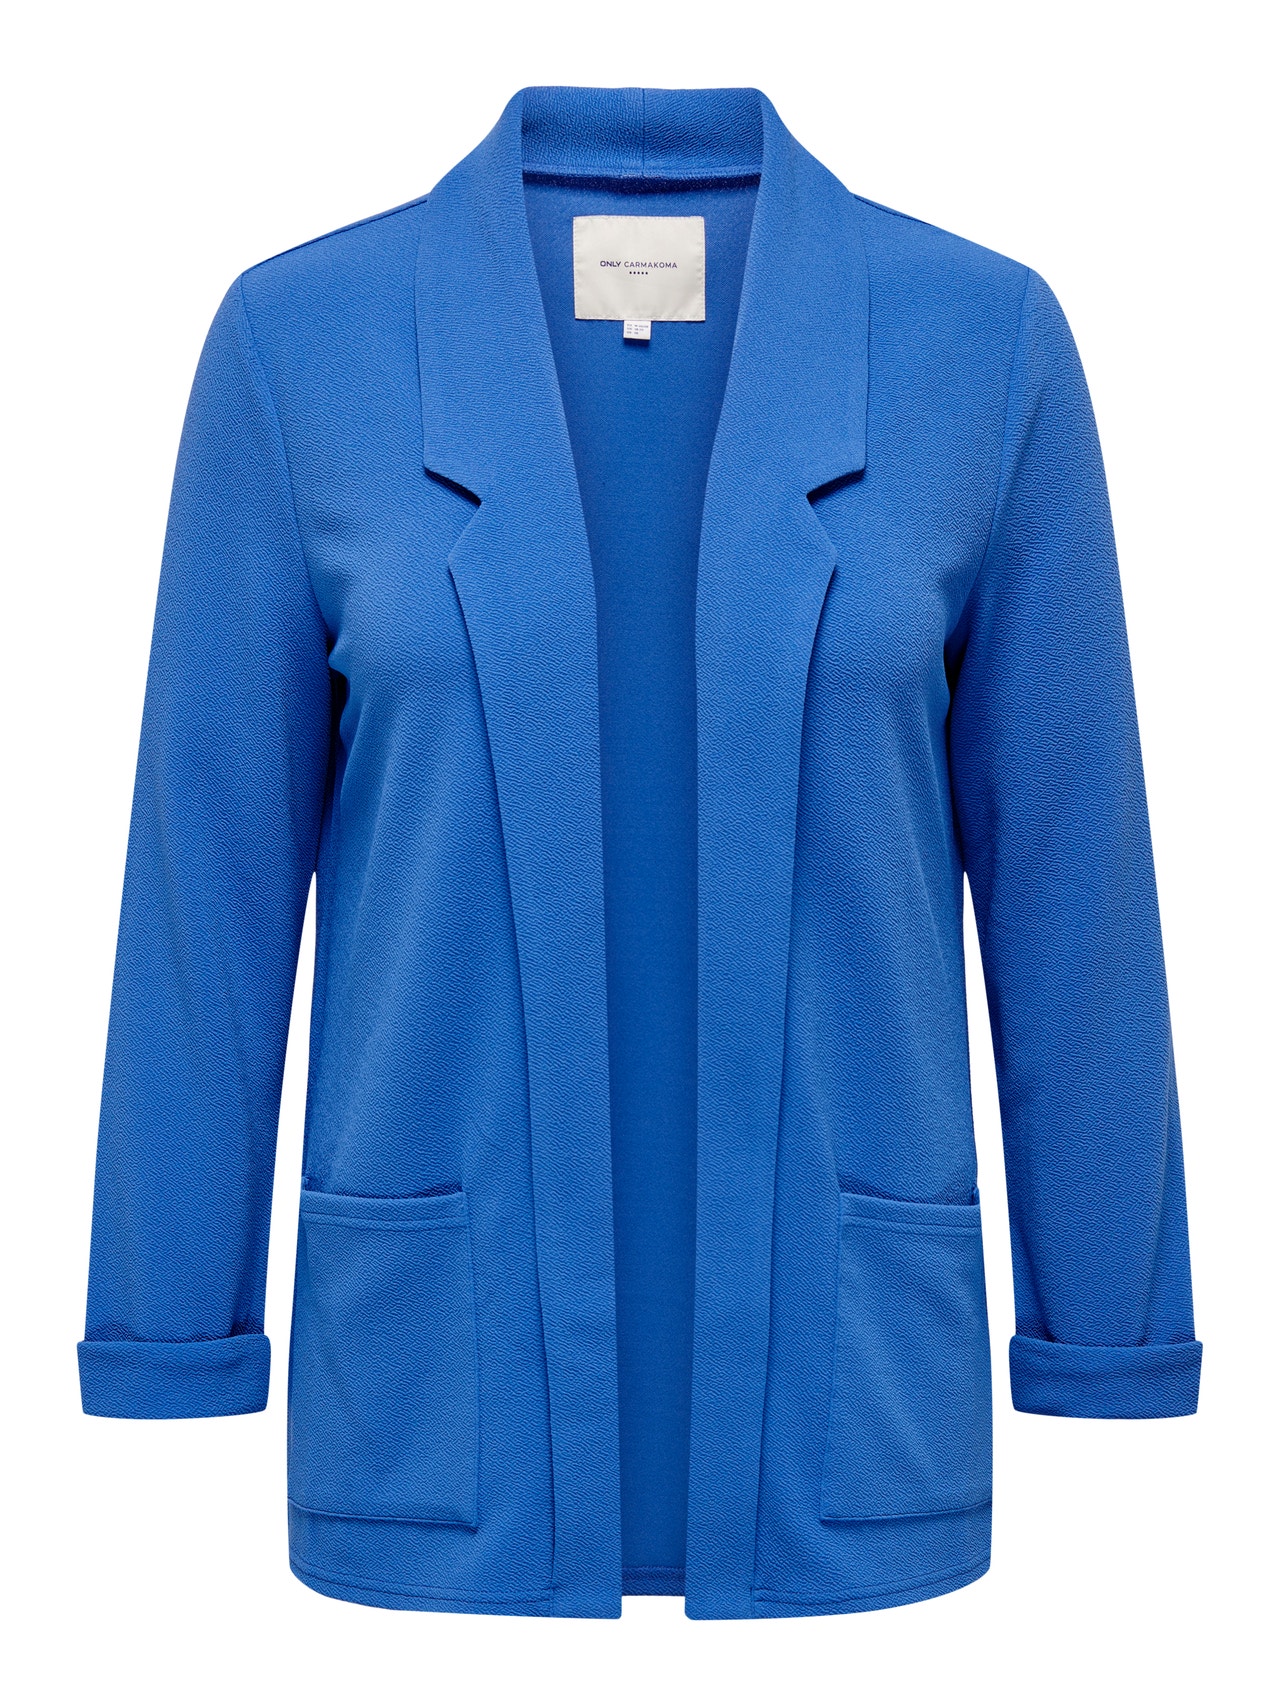 ONLY Curvy open Blazer -Strong Blue - 15227525